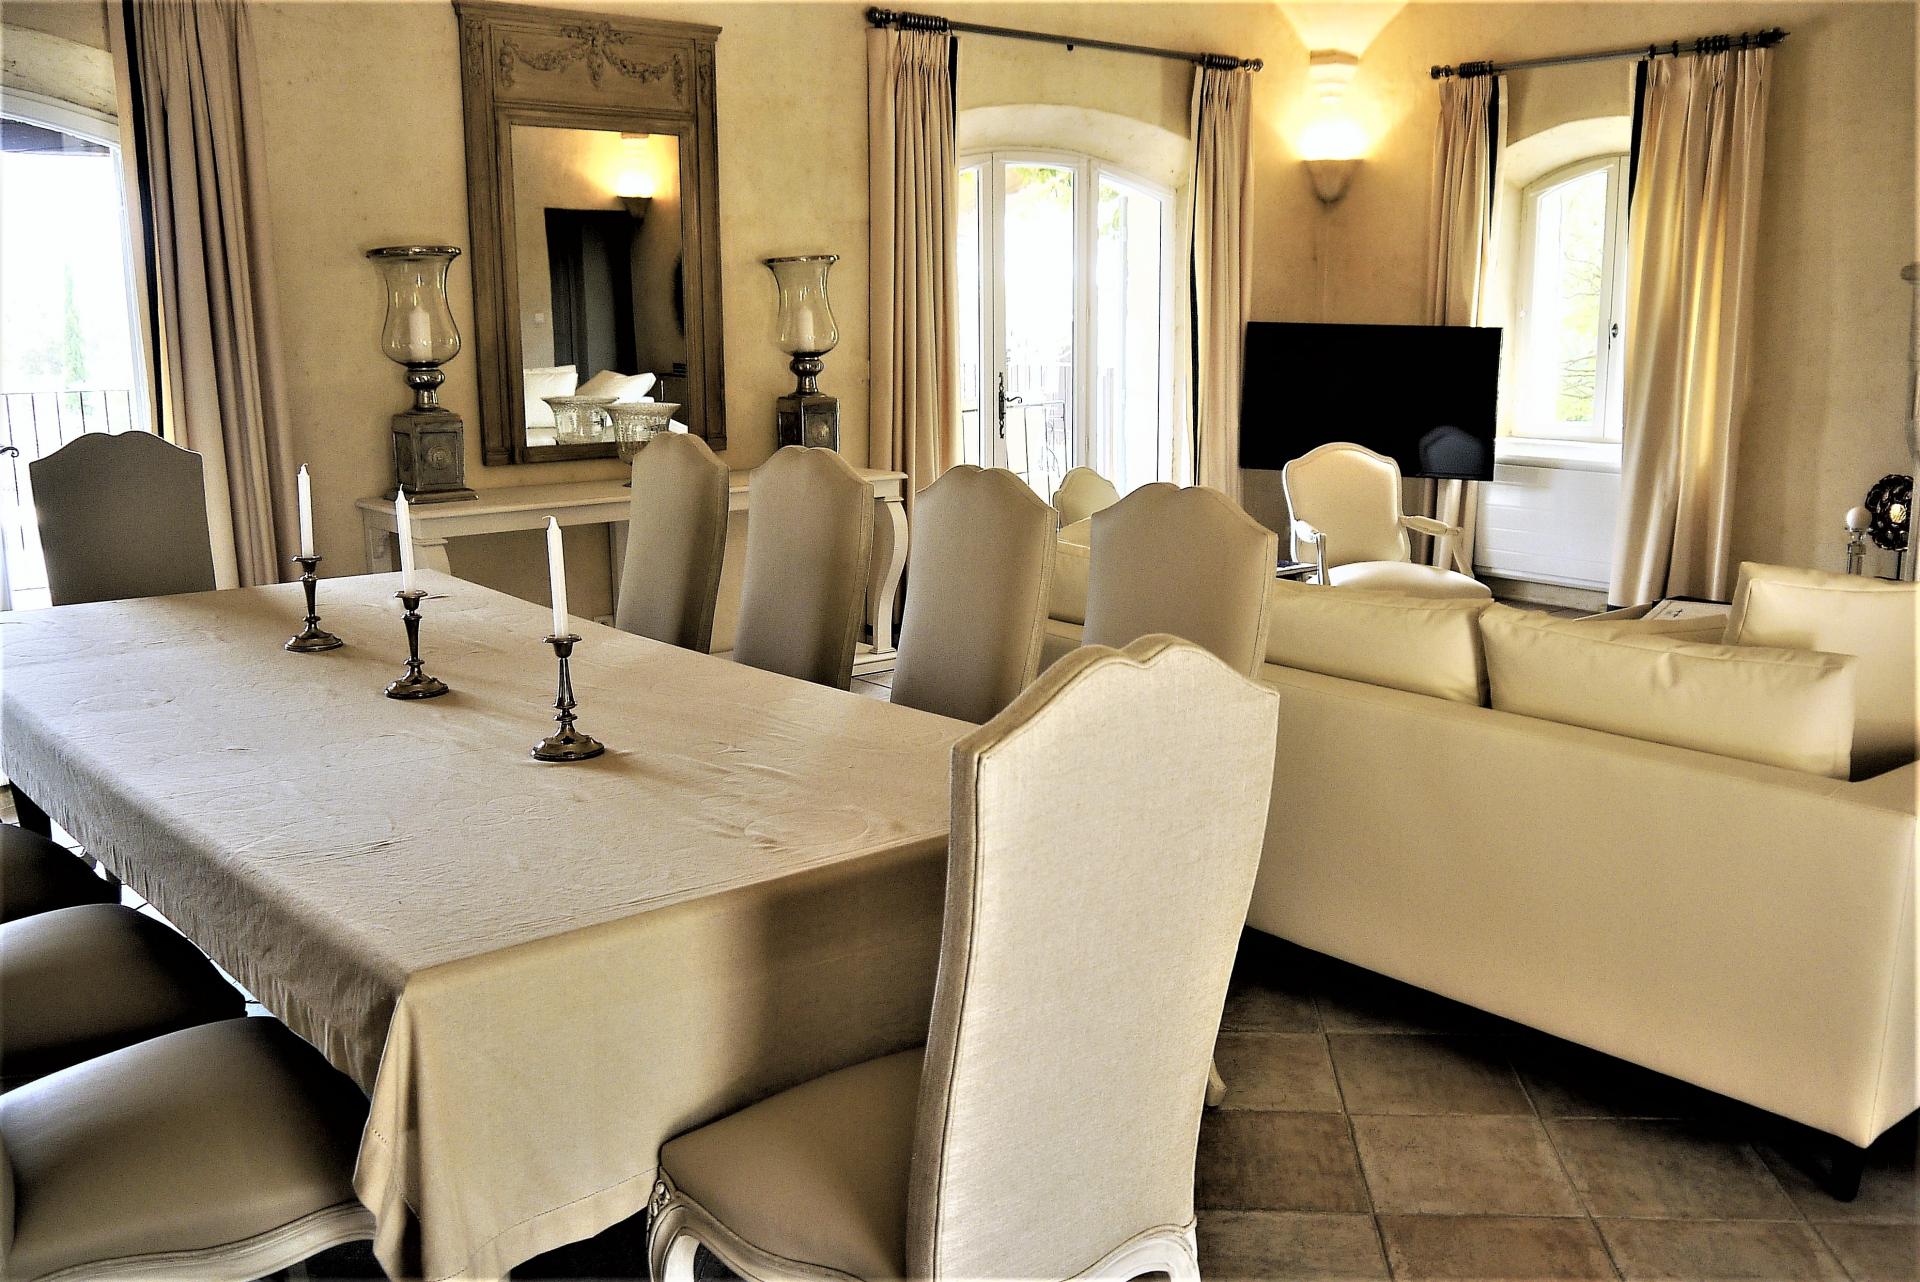 THE DINING ROOM IN LA VILLA ANGELE HOLIDAY RENTAL IN LUBERON PROVENCE